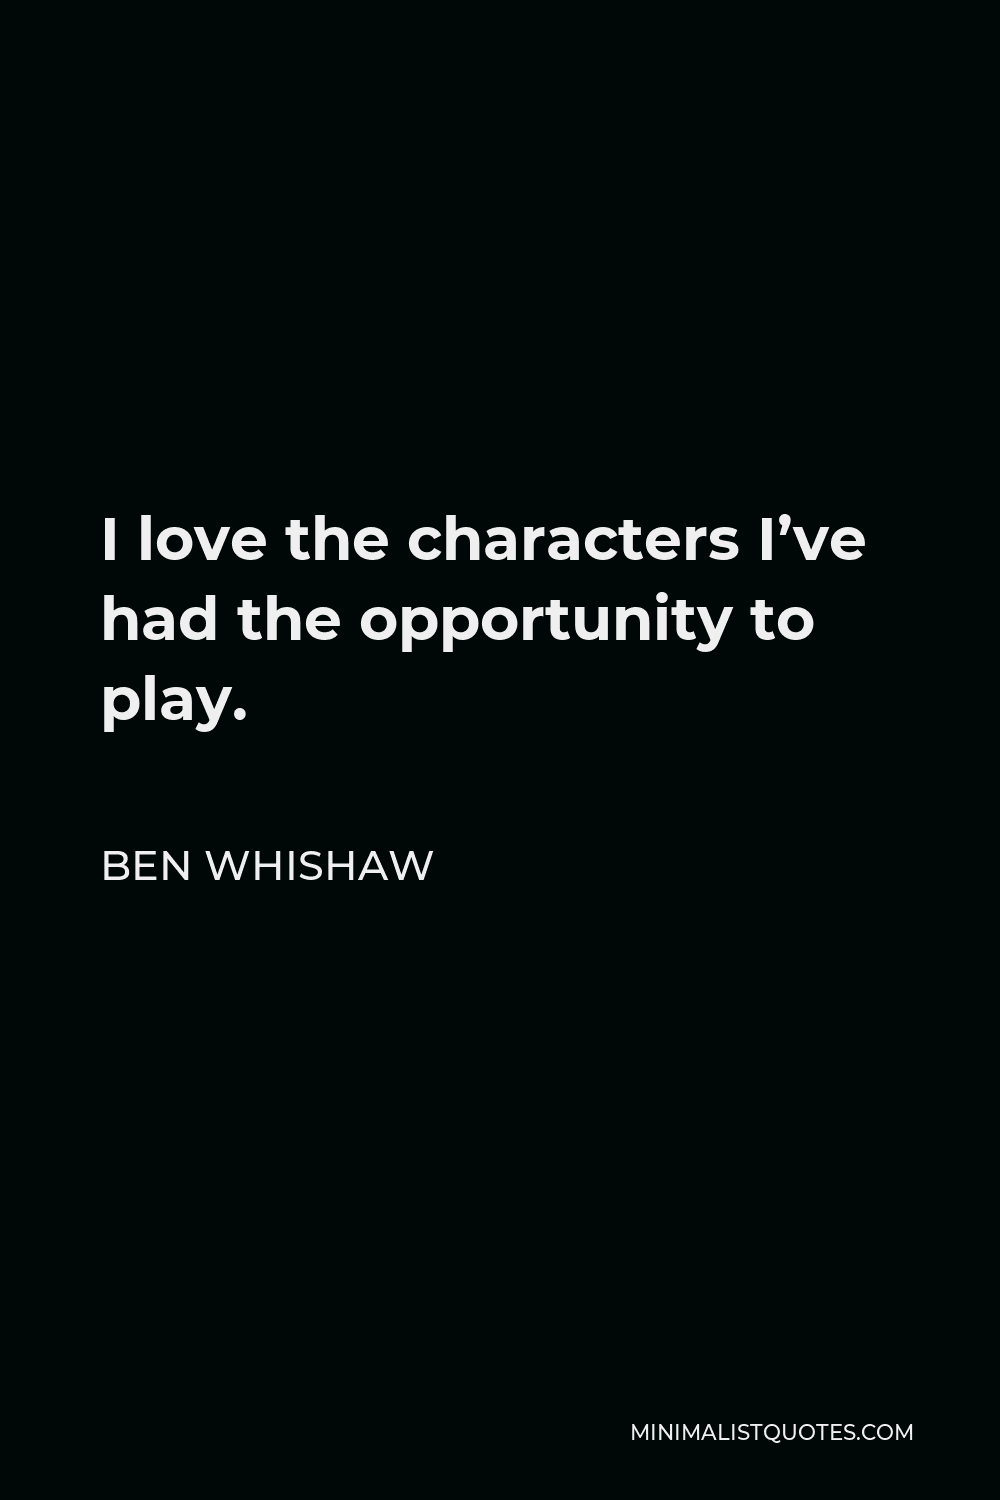 Ben Whishaw Quote - I love the characters I’ve had the opportunity to play.